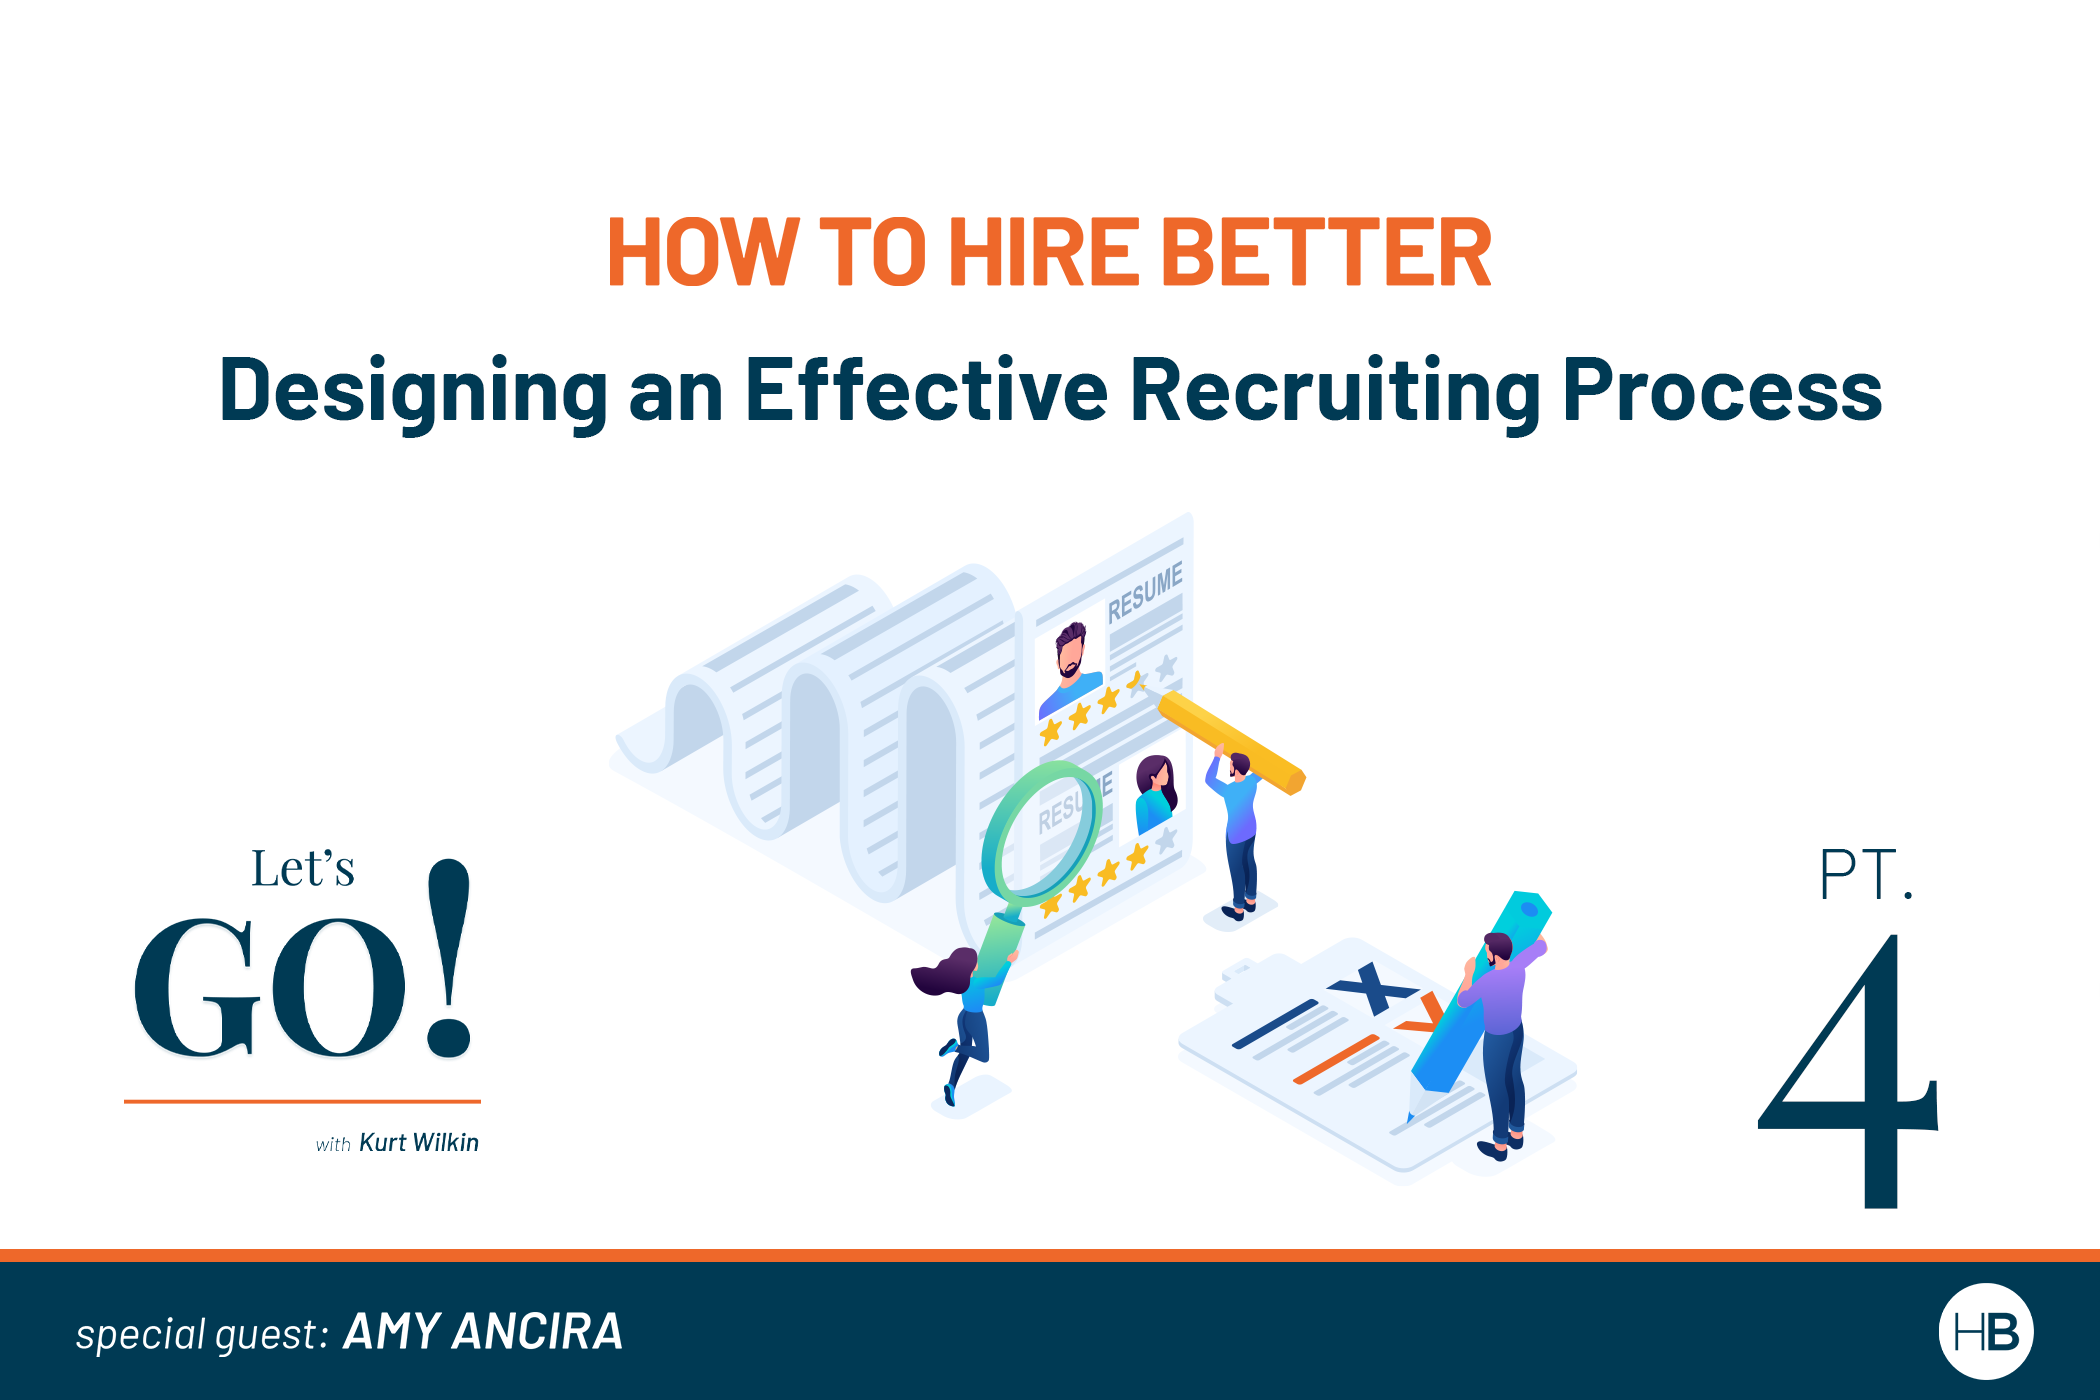 How to Hire Better Part 4 - Designing an Effective Recruiting Strategy